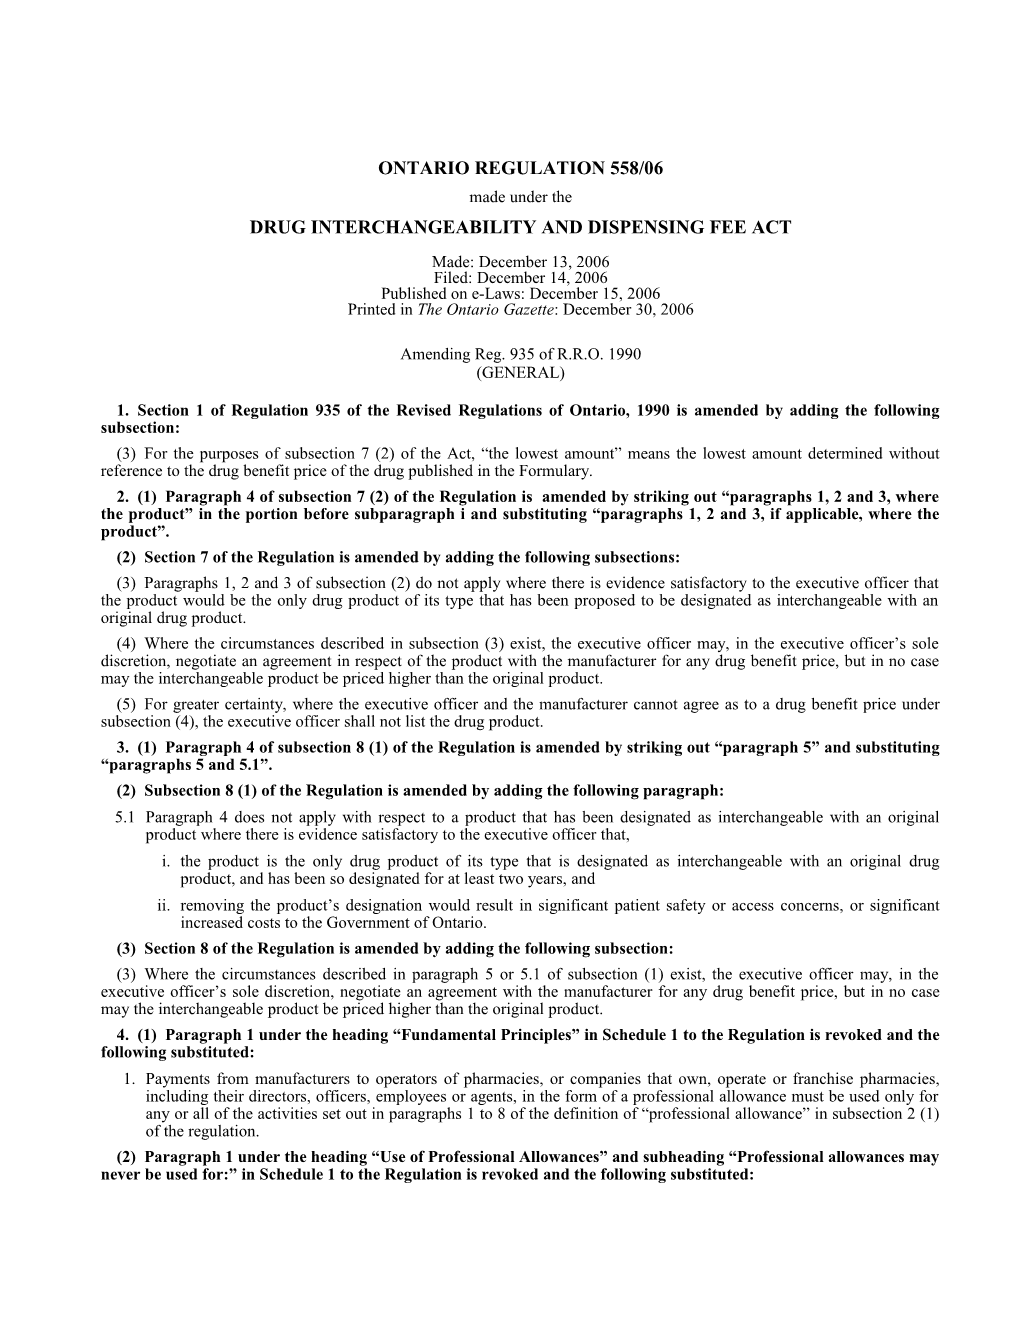 DRUG INTERCHANGEABILITY and DISPENSING FEE ACT - O. Reg. 558/06